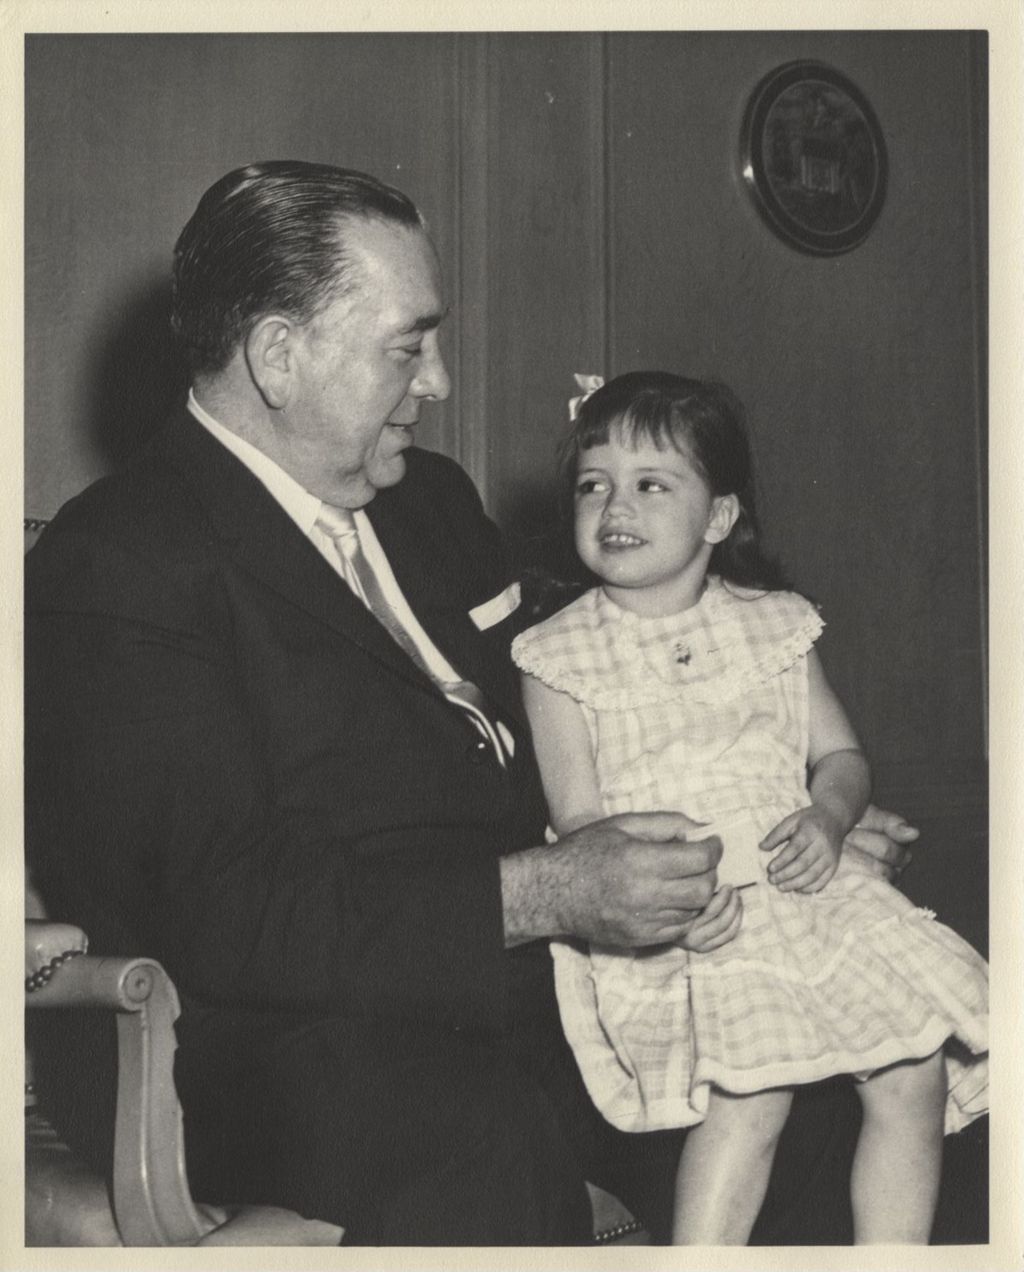 Miniature of Richard J. Daley with a young girl